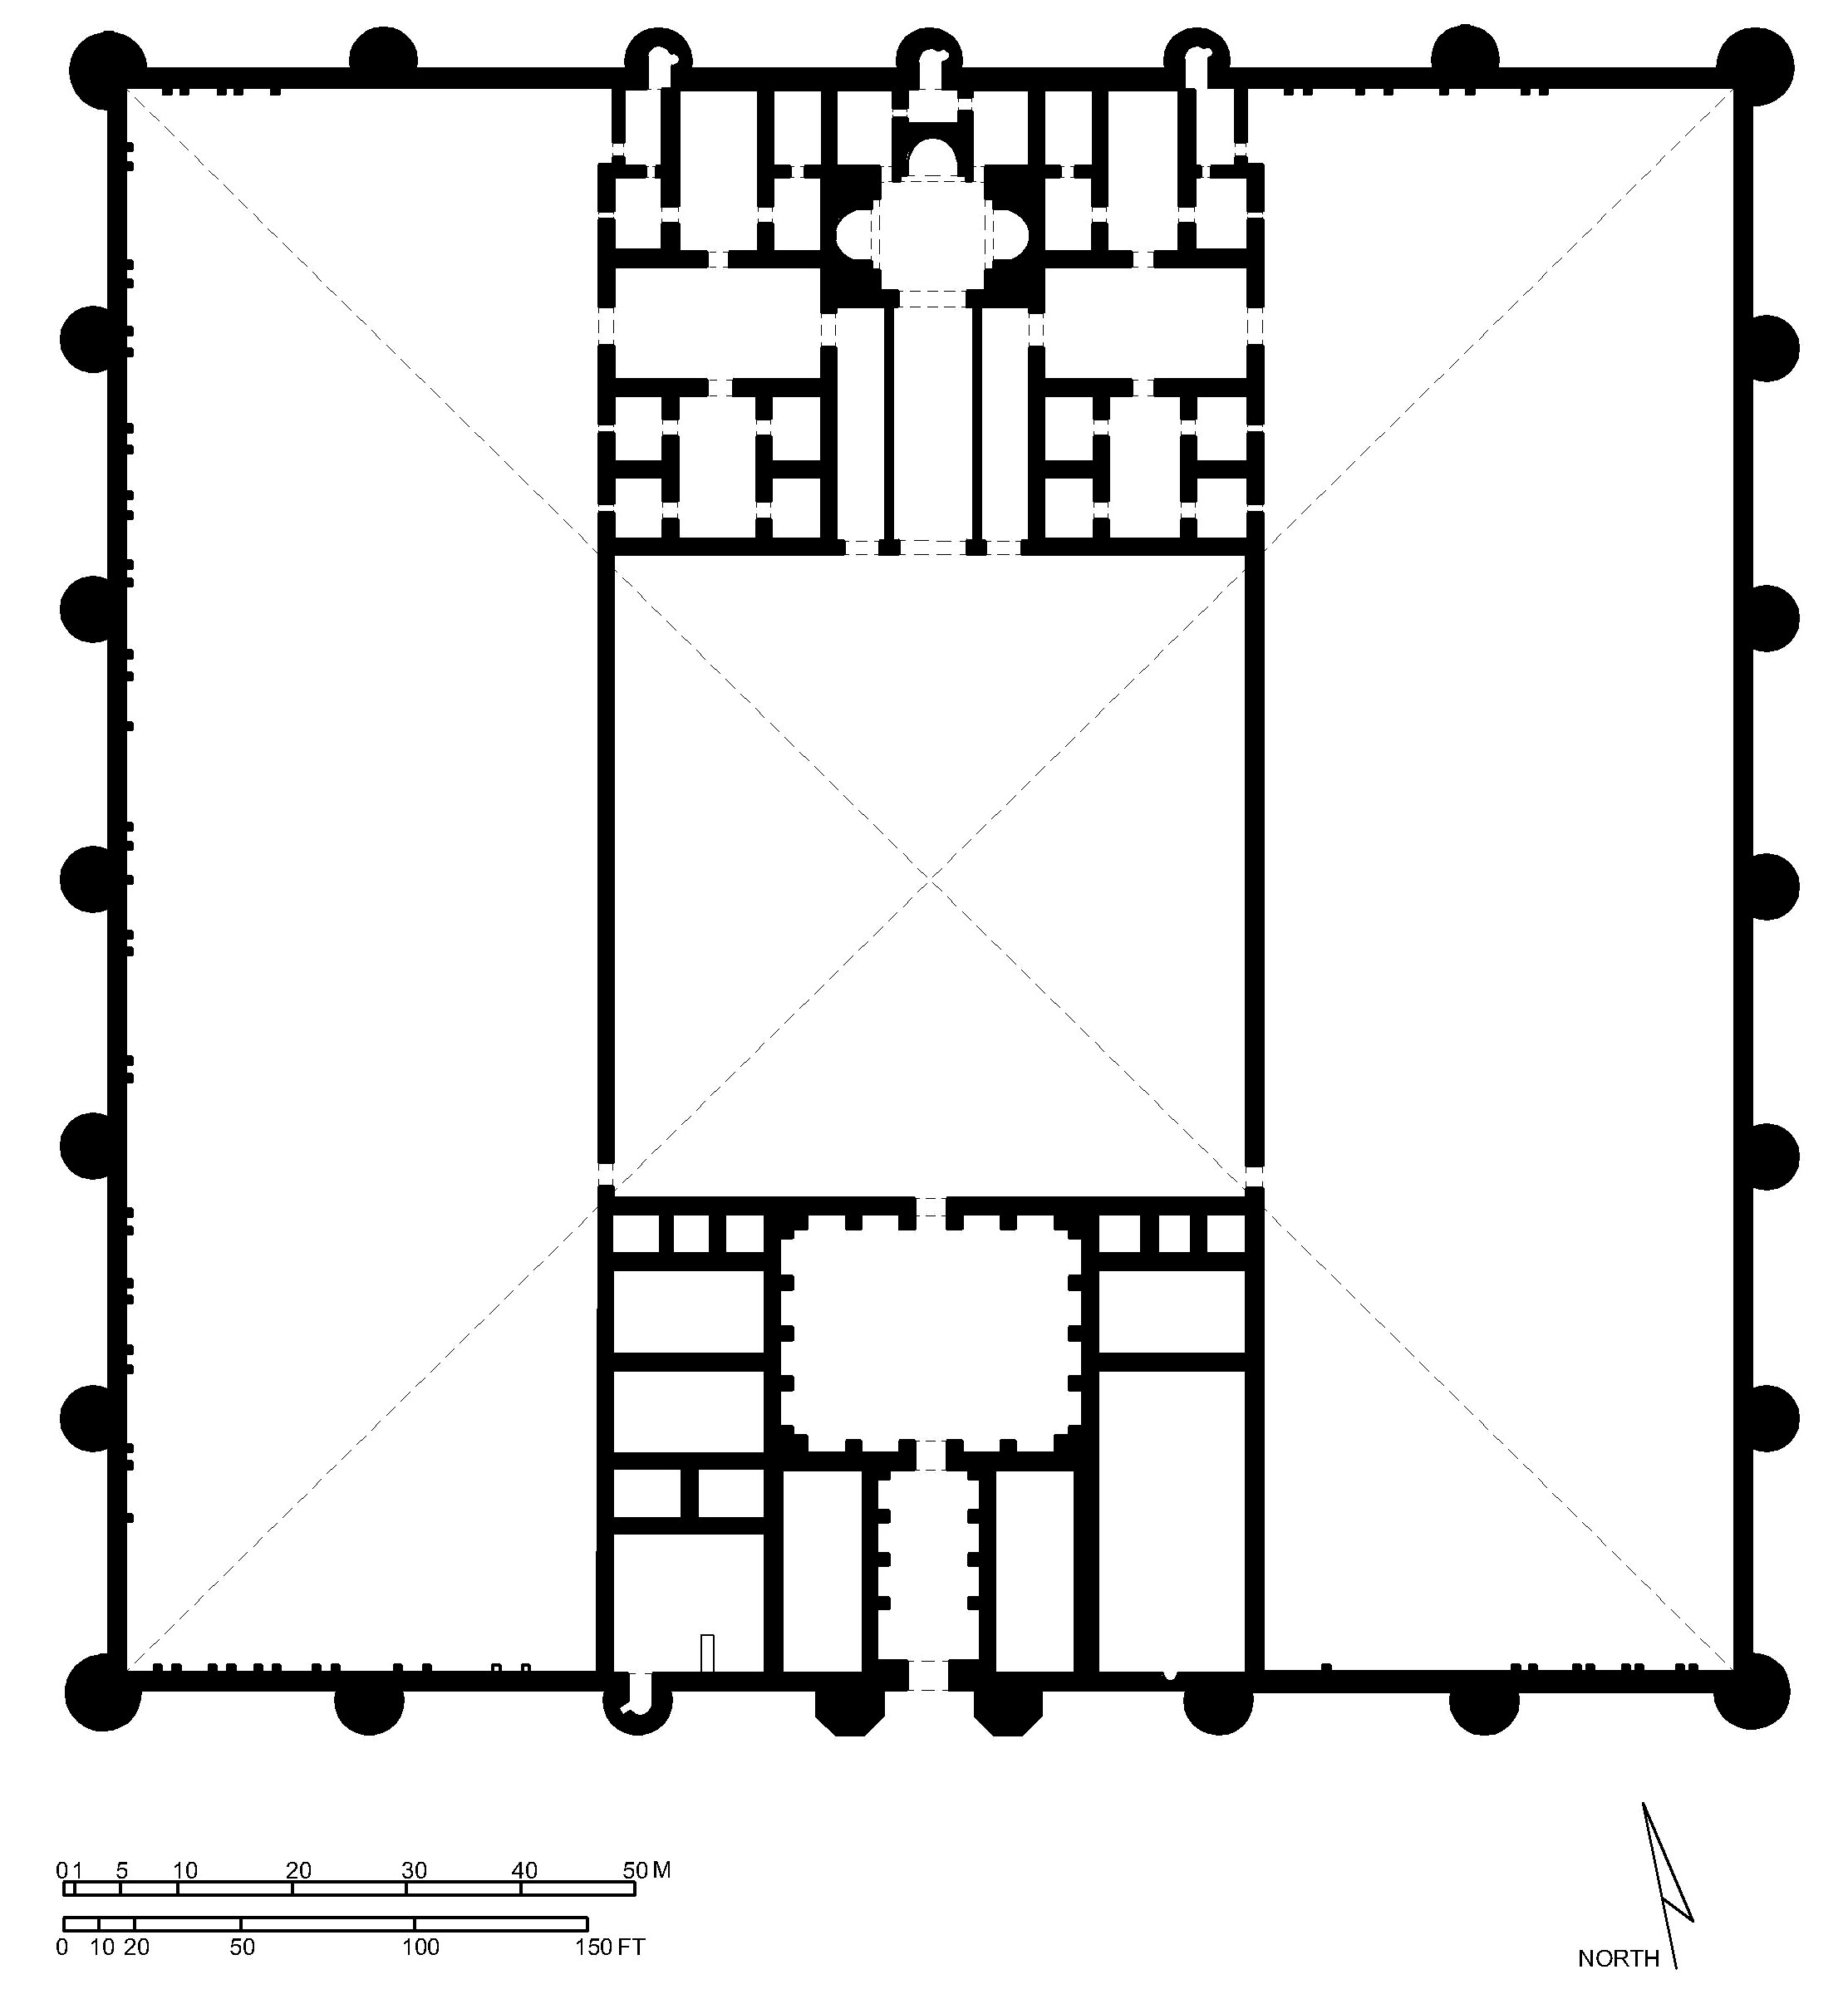 Qasr al-Mshatta - Floor plan of palace in AutoCAD 2000 format. Click the download button to download a zipped file containing the .dwg file.